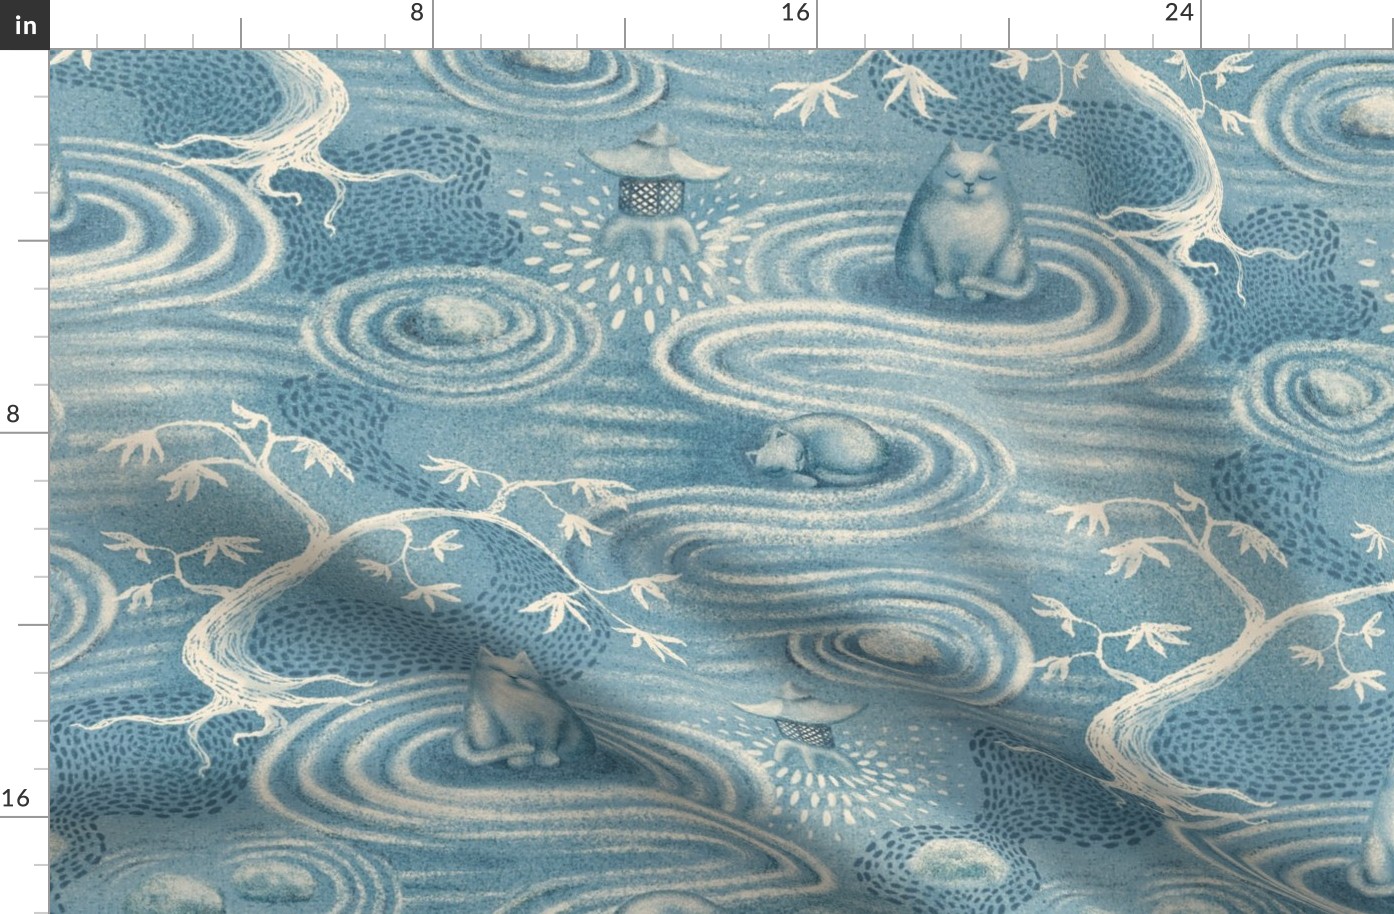 zen cats's garden wallpaper - aqua blue and ivory - extra large scale